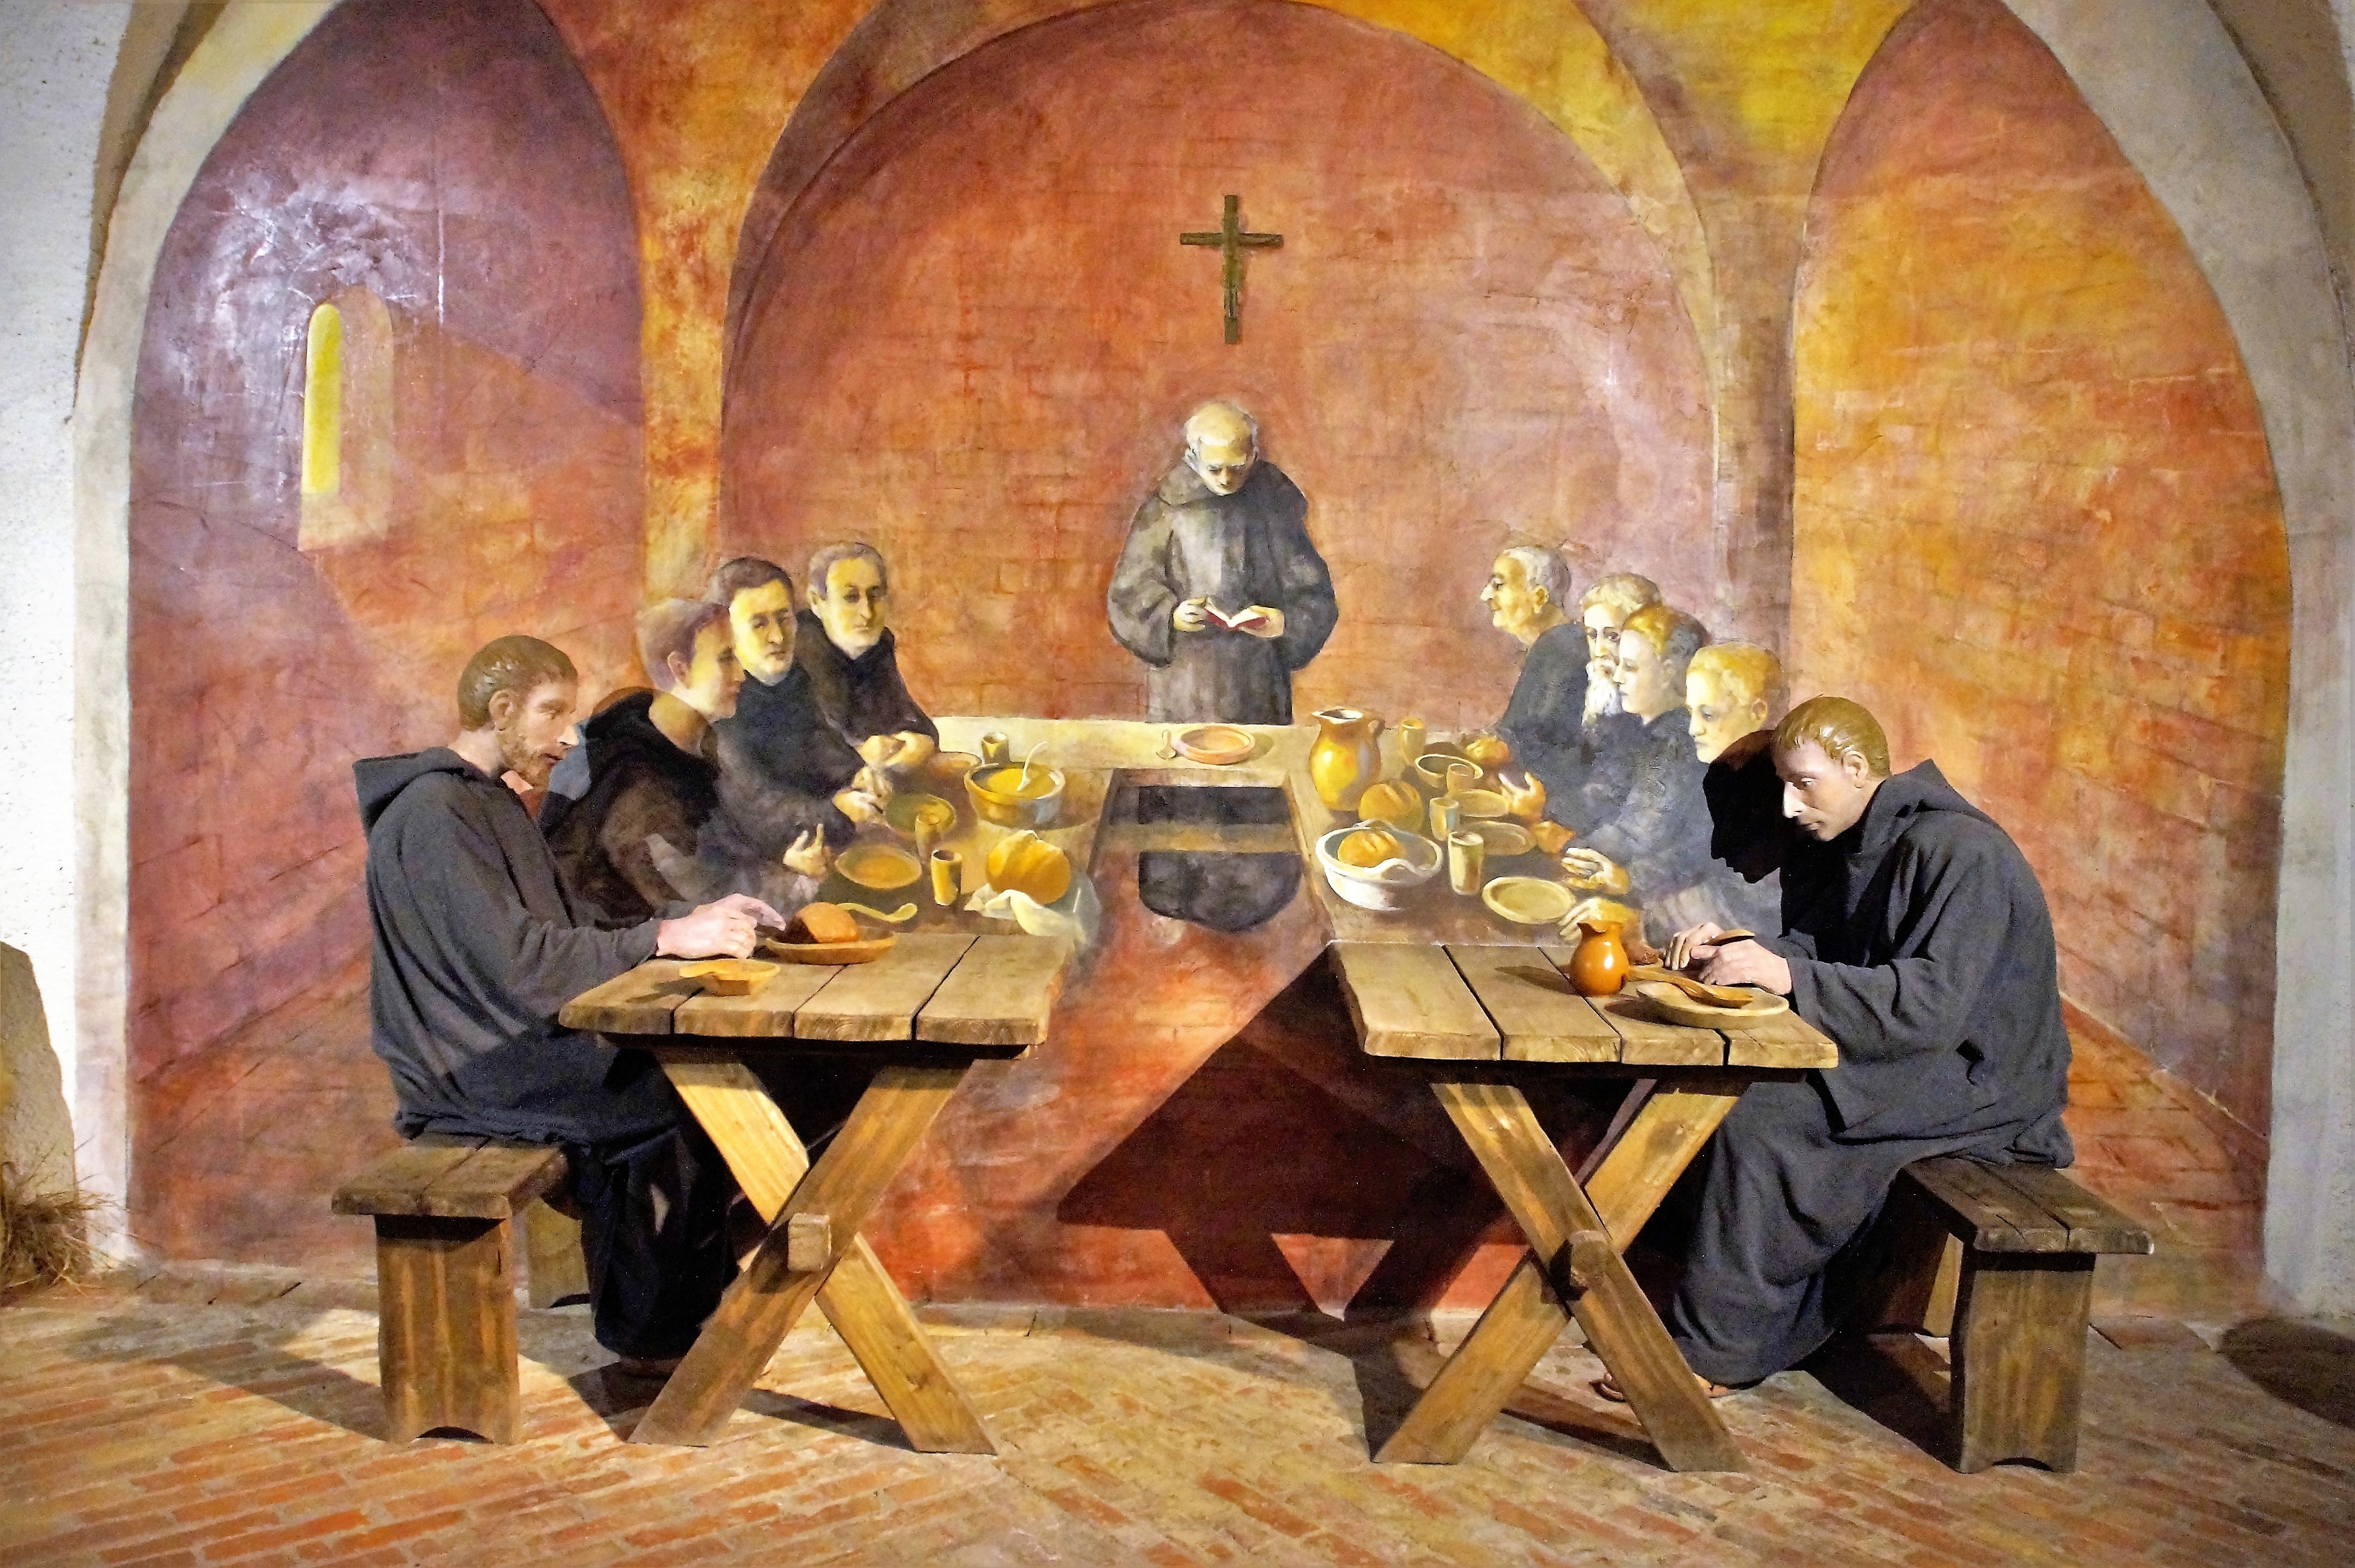 priest on wooden tables